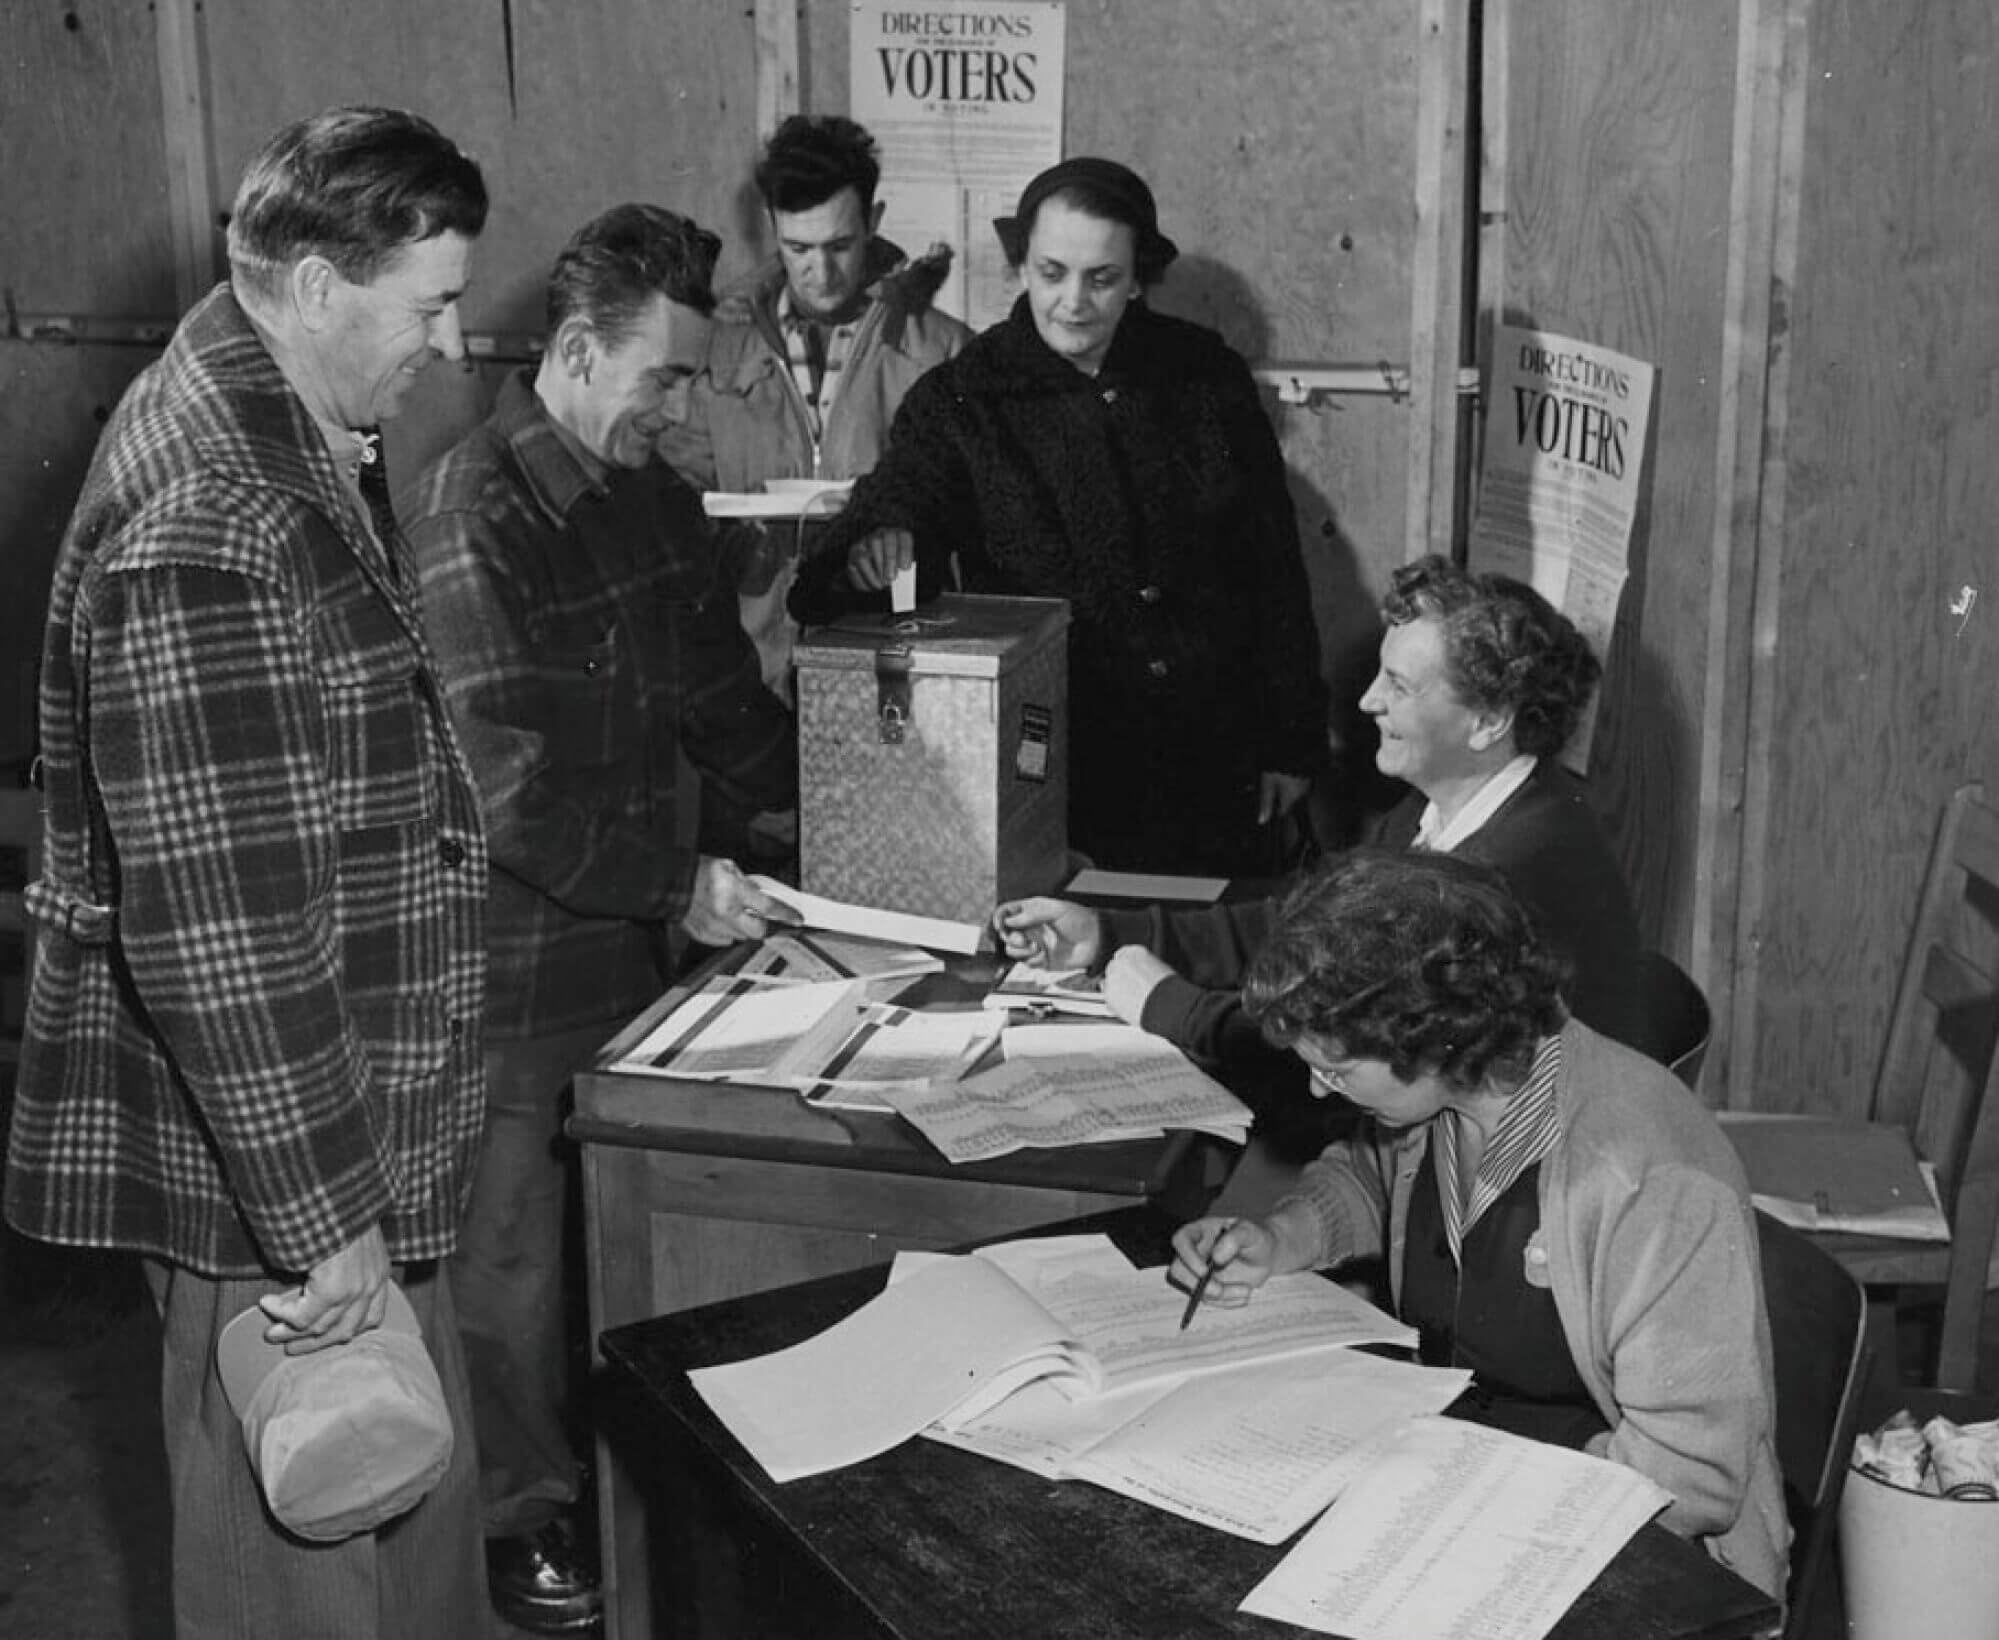 a black and white image of a woman seated at a voting booth. To the left are a group of voters ready to cast their vote. Another woman stands over a ballot box placing her ballot inside.